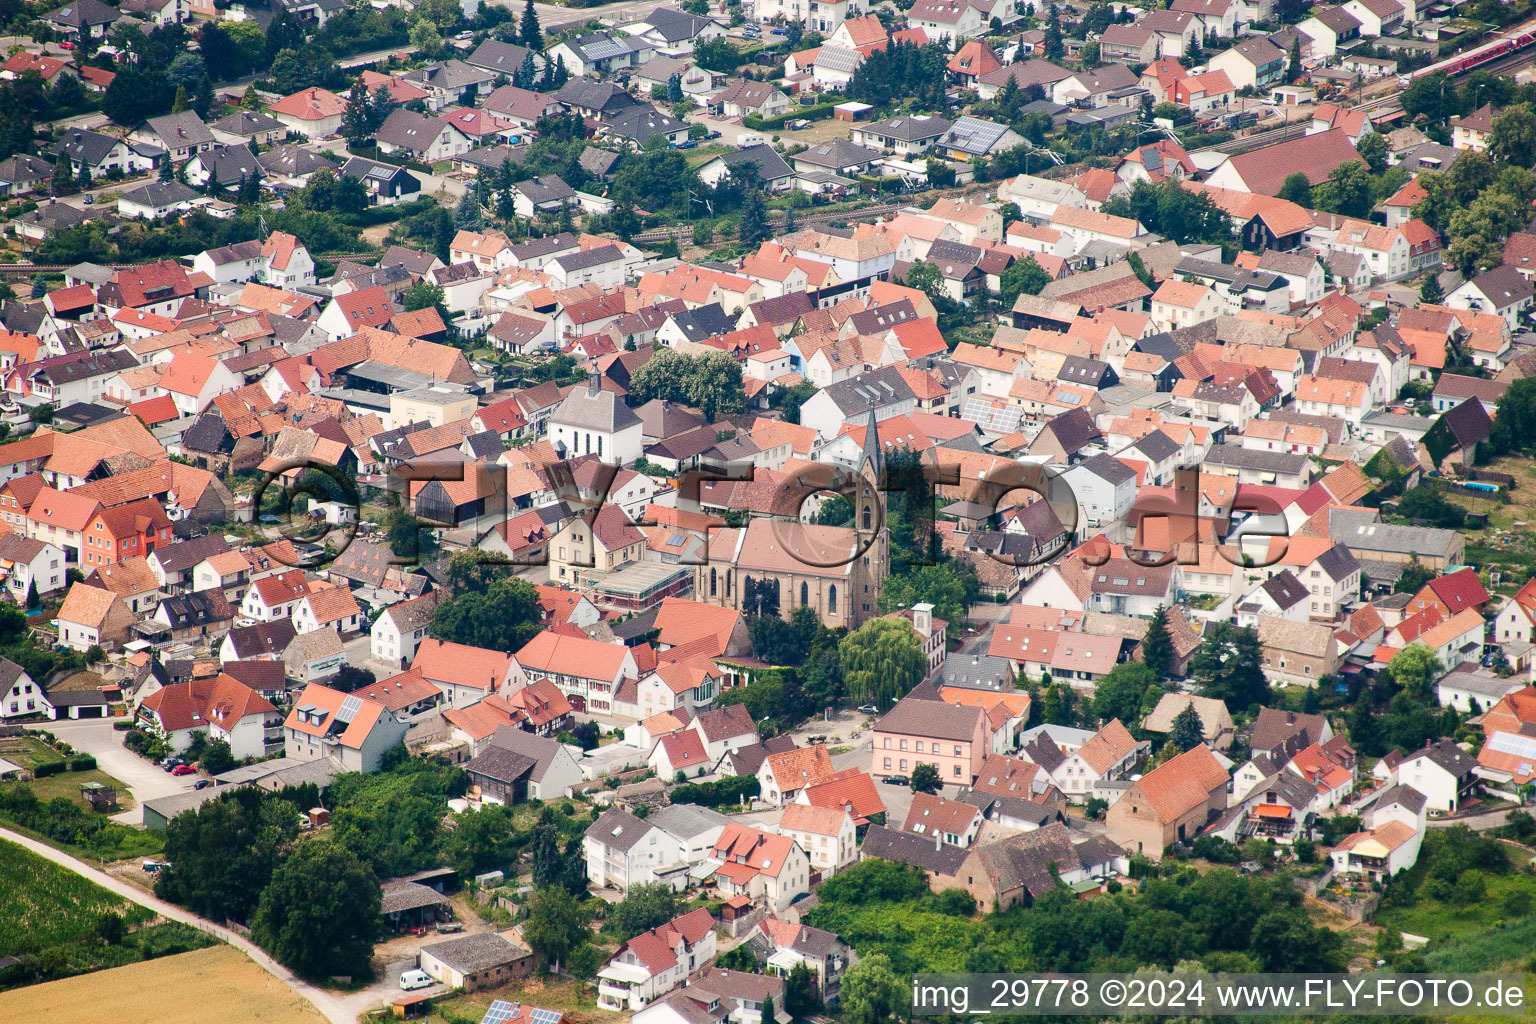 Town View of the streets and houses of the residential areas in the district Sondernheim in Germersheim in the state Rhineland-Palatinate, Germany